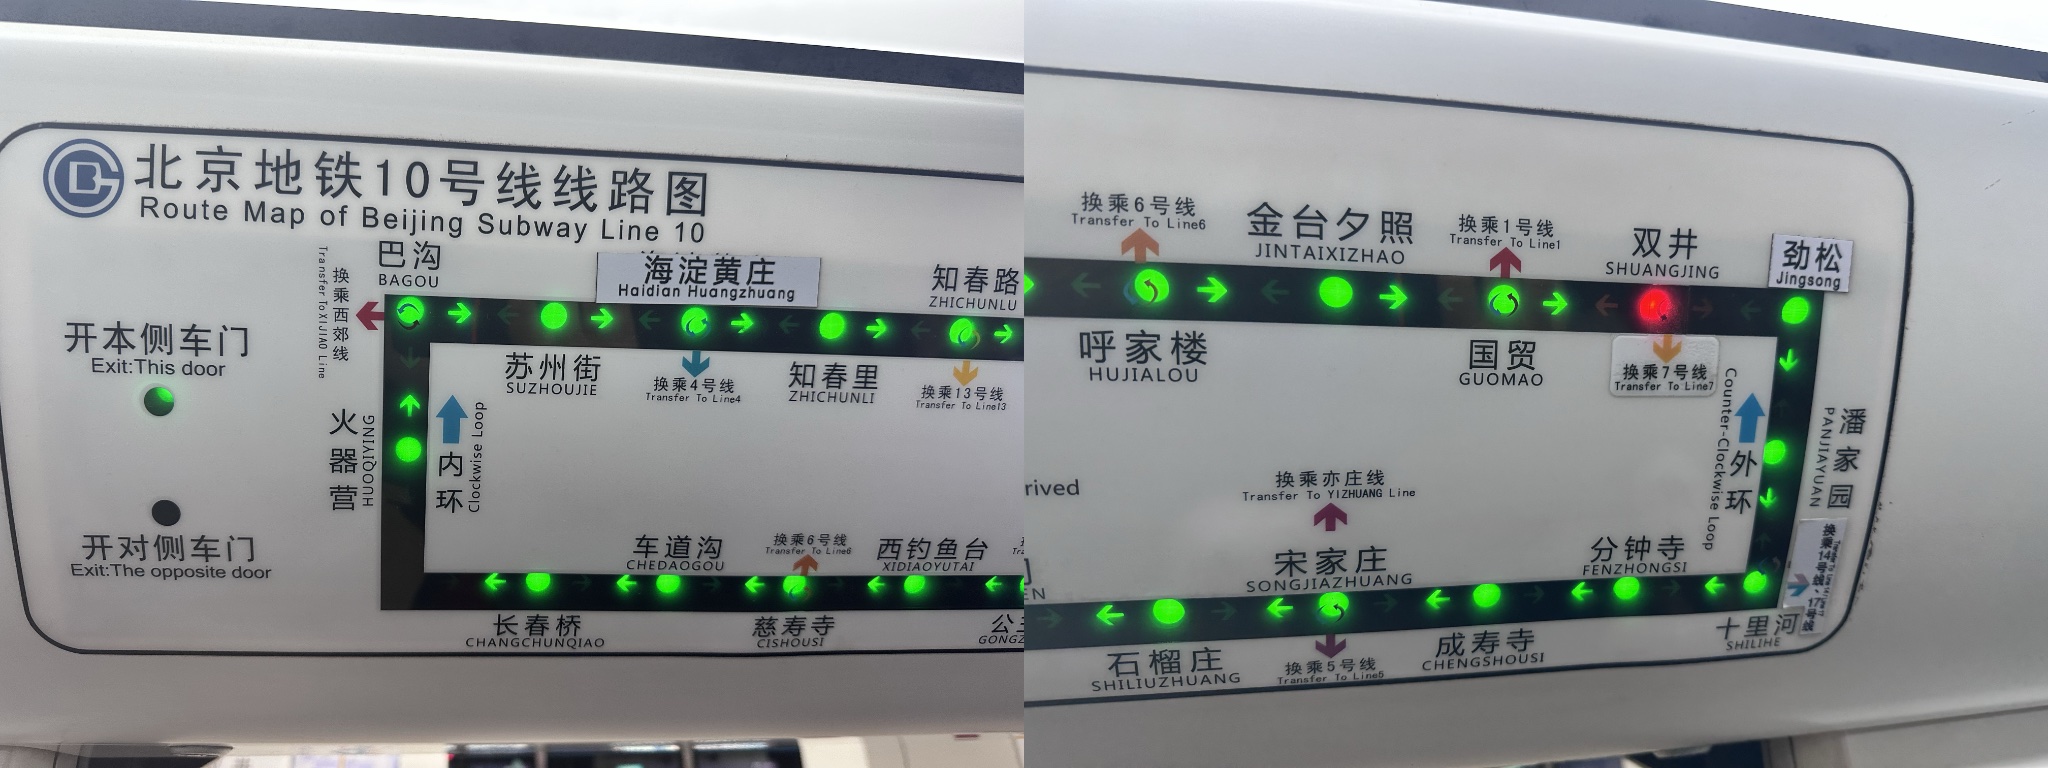 Two photos of a map of Beijing Subway Line 10 showing the translations for directions of travel.